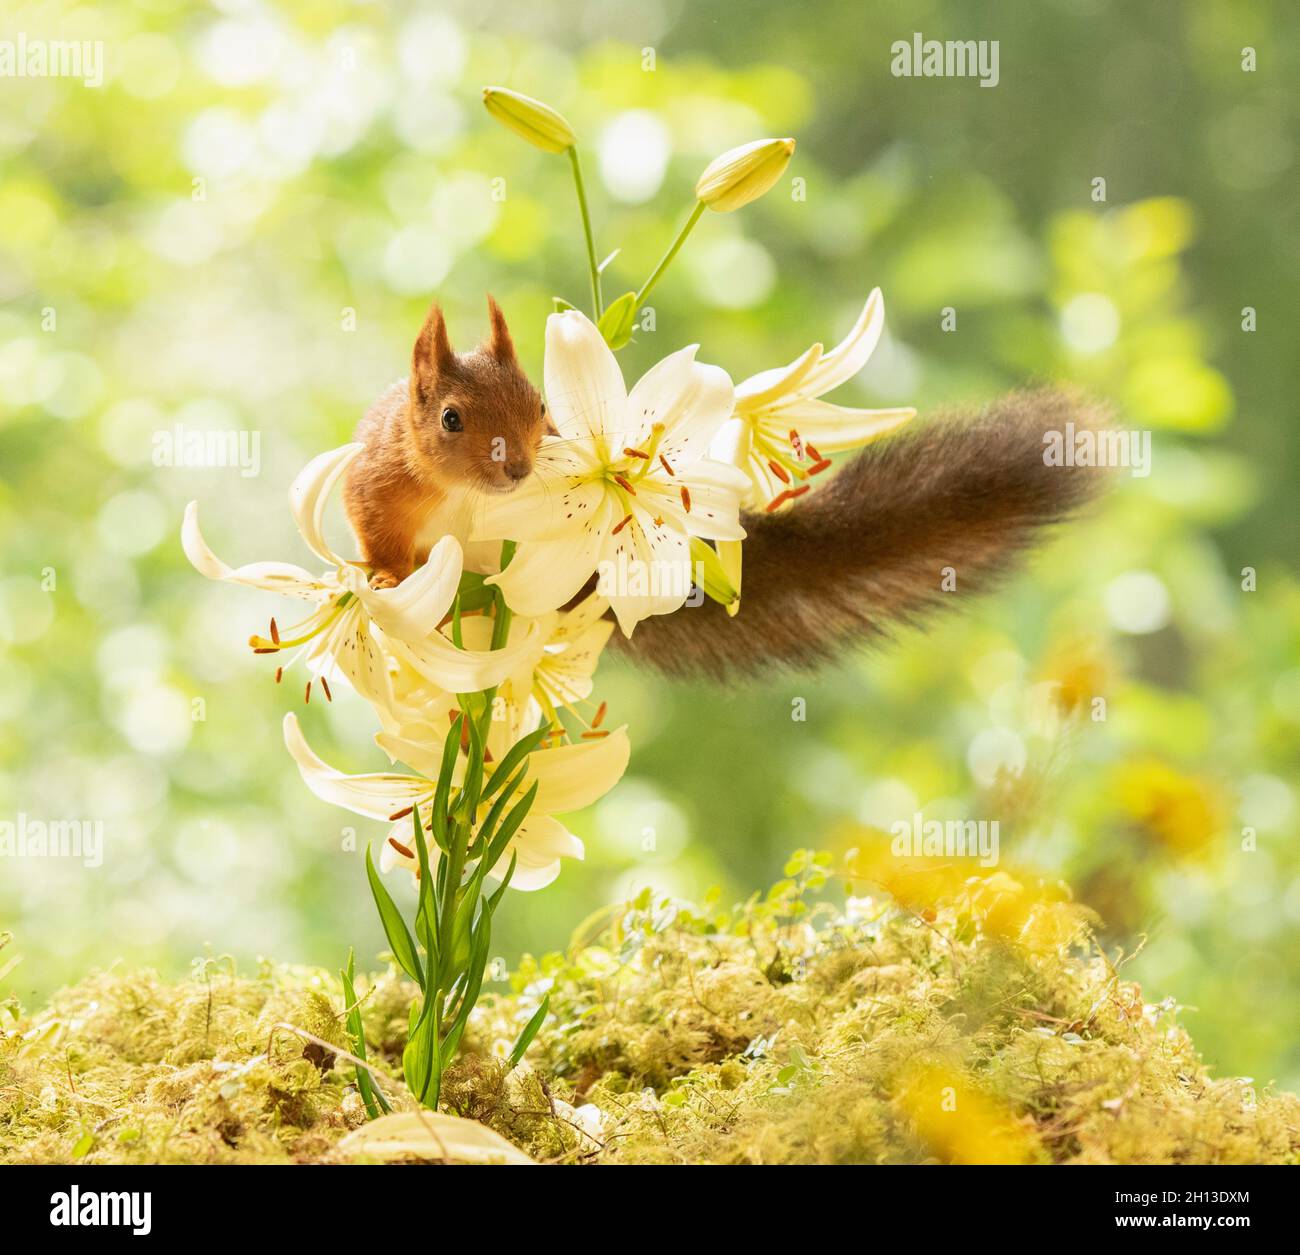 red squirrel is standing in a white lily looking at the viewer Stock Photo